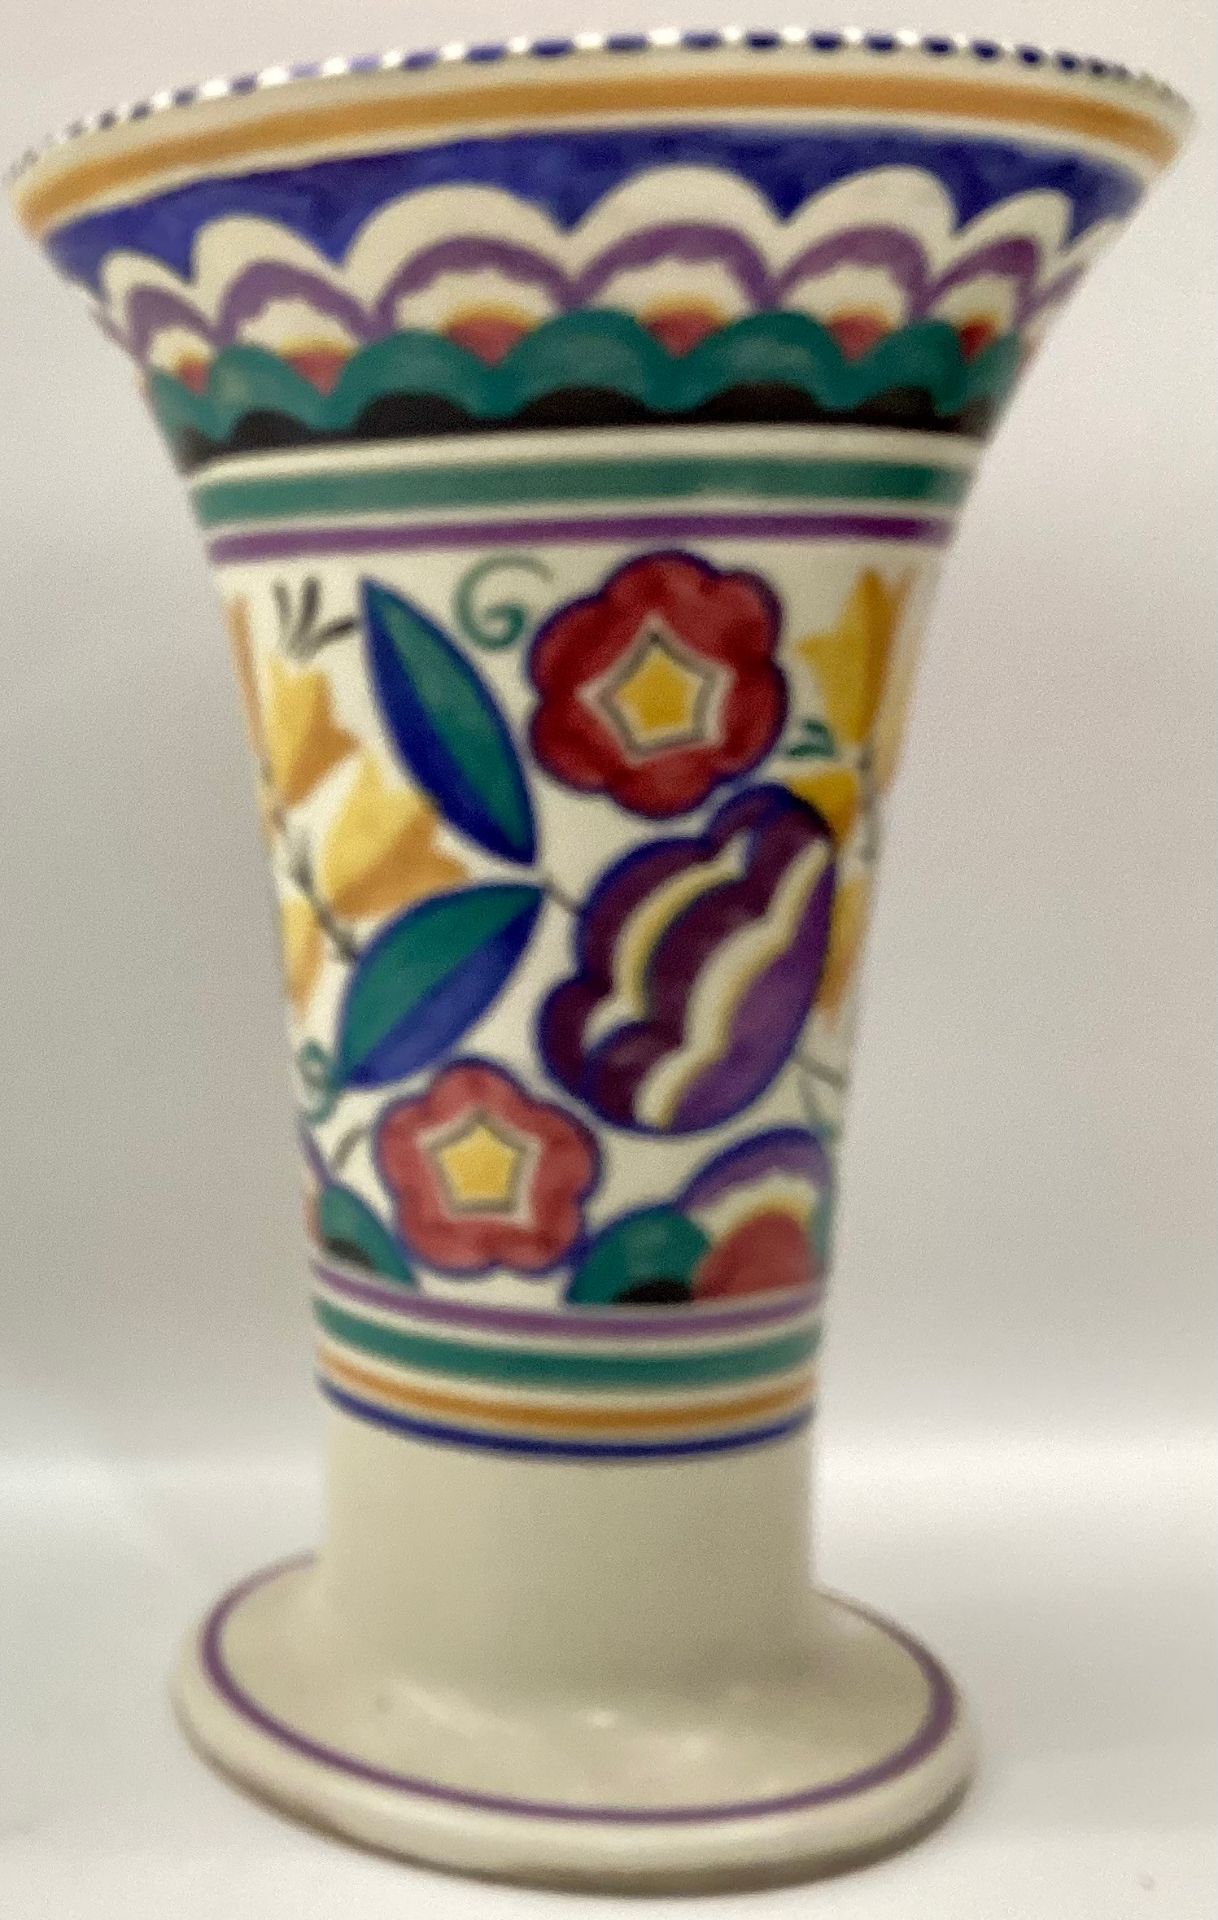 Poole Pottery shape 598 YW pattern large trumpet vase by Clarice Heath 9" high. - Image 2 of 5